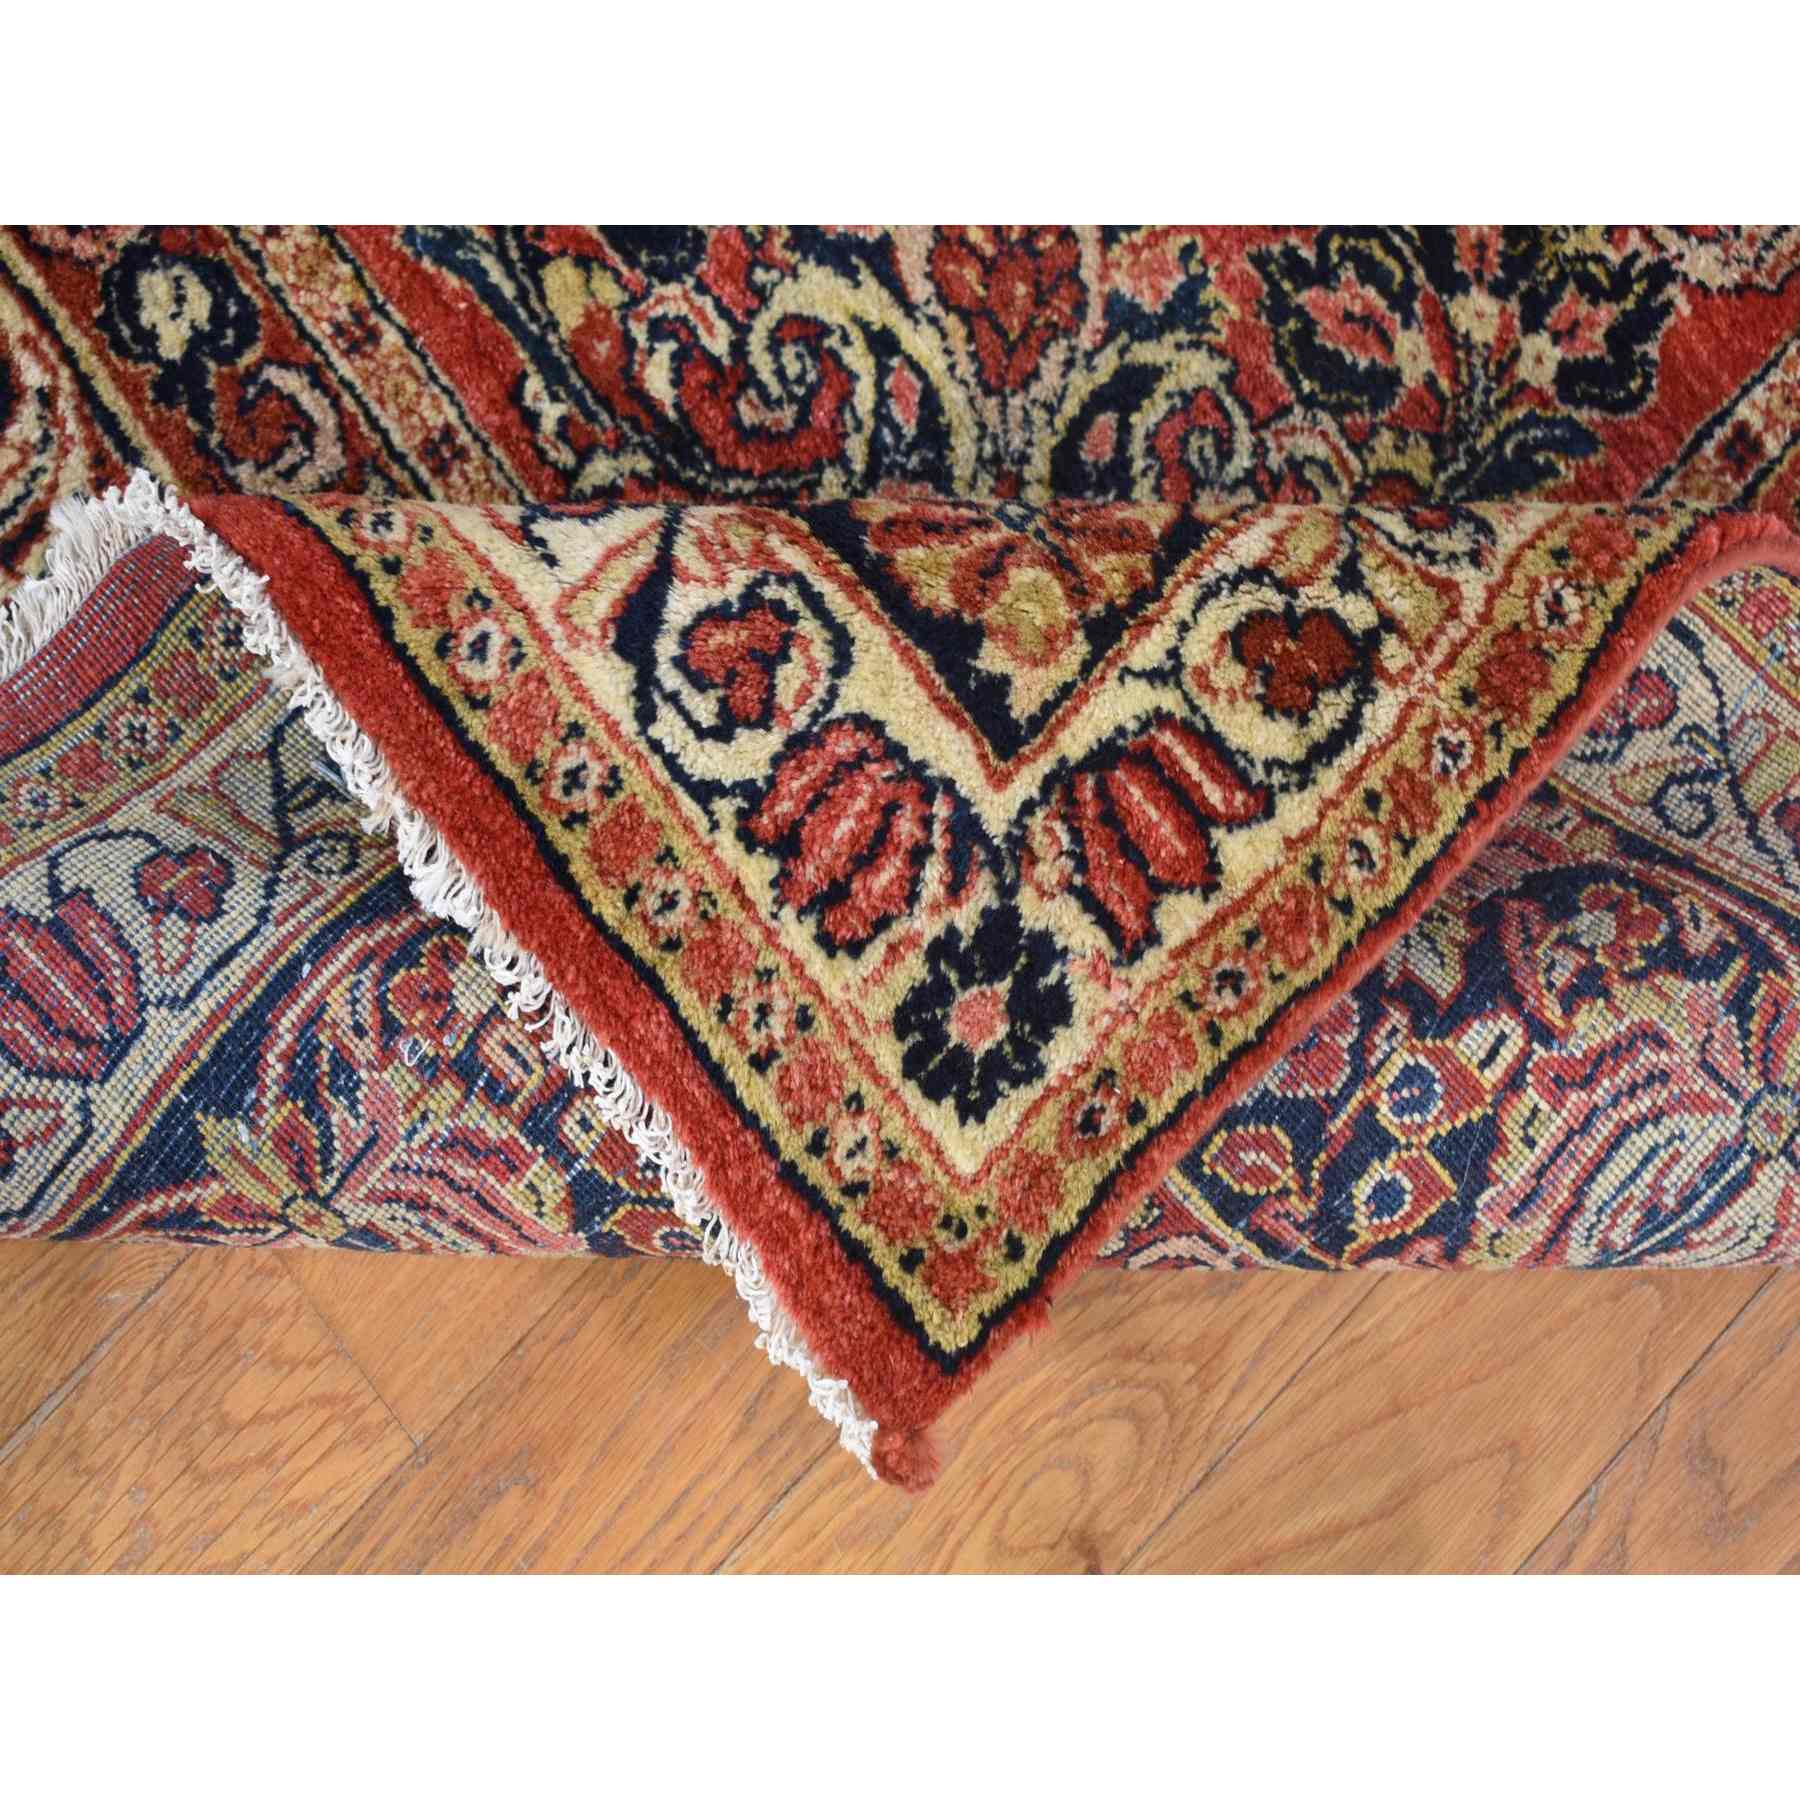 Antique-Hand-Knotted-Rug-400320